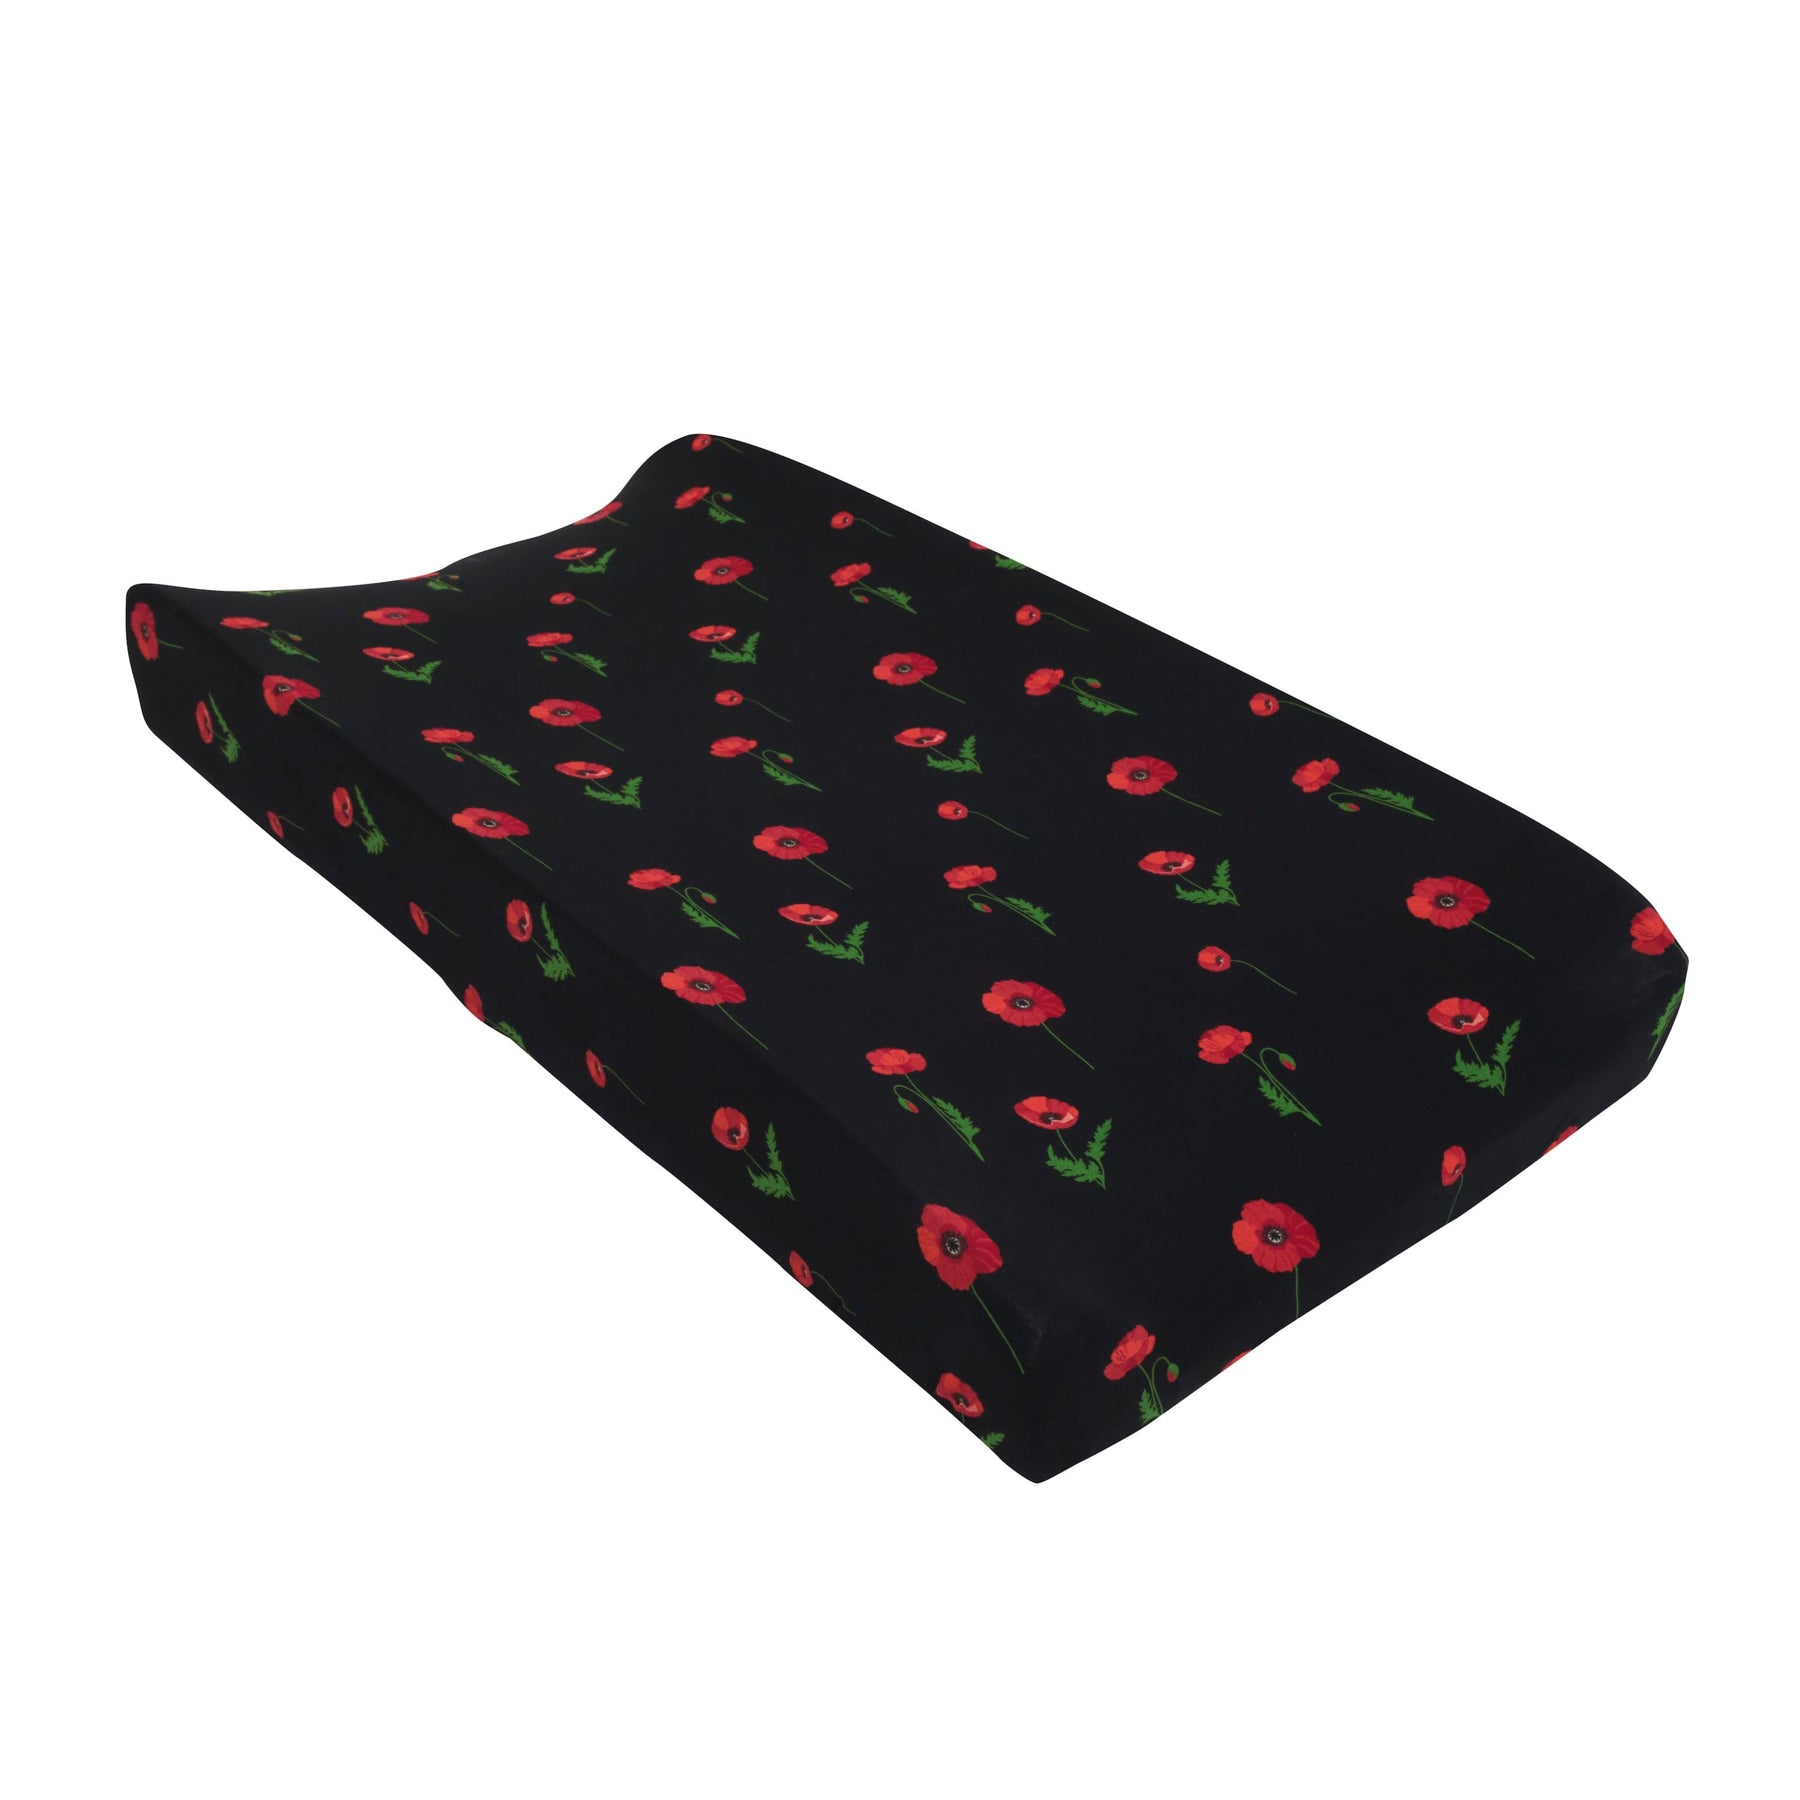 Kyte Baby Change Pad Cover Midnight Poppies / One Size Change Pad Cover in Midnight Poppies